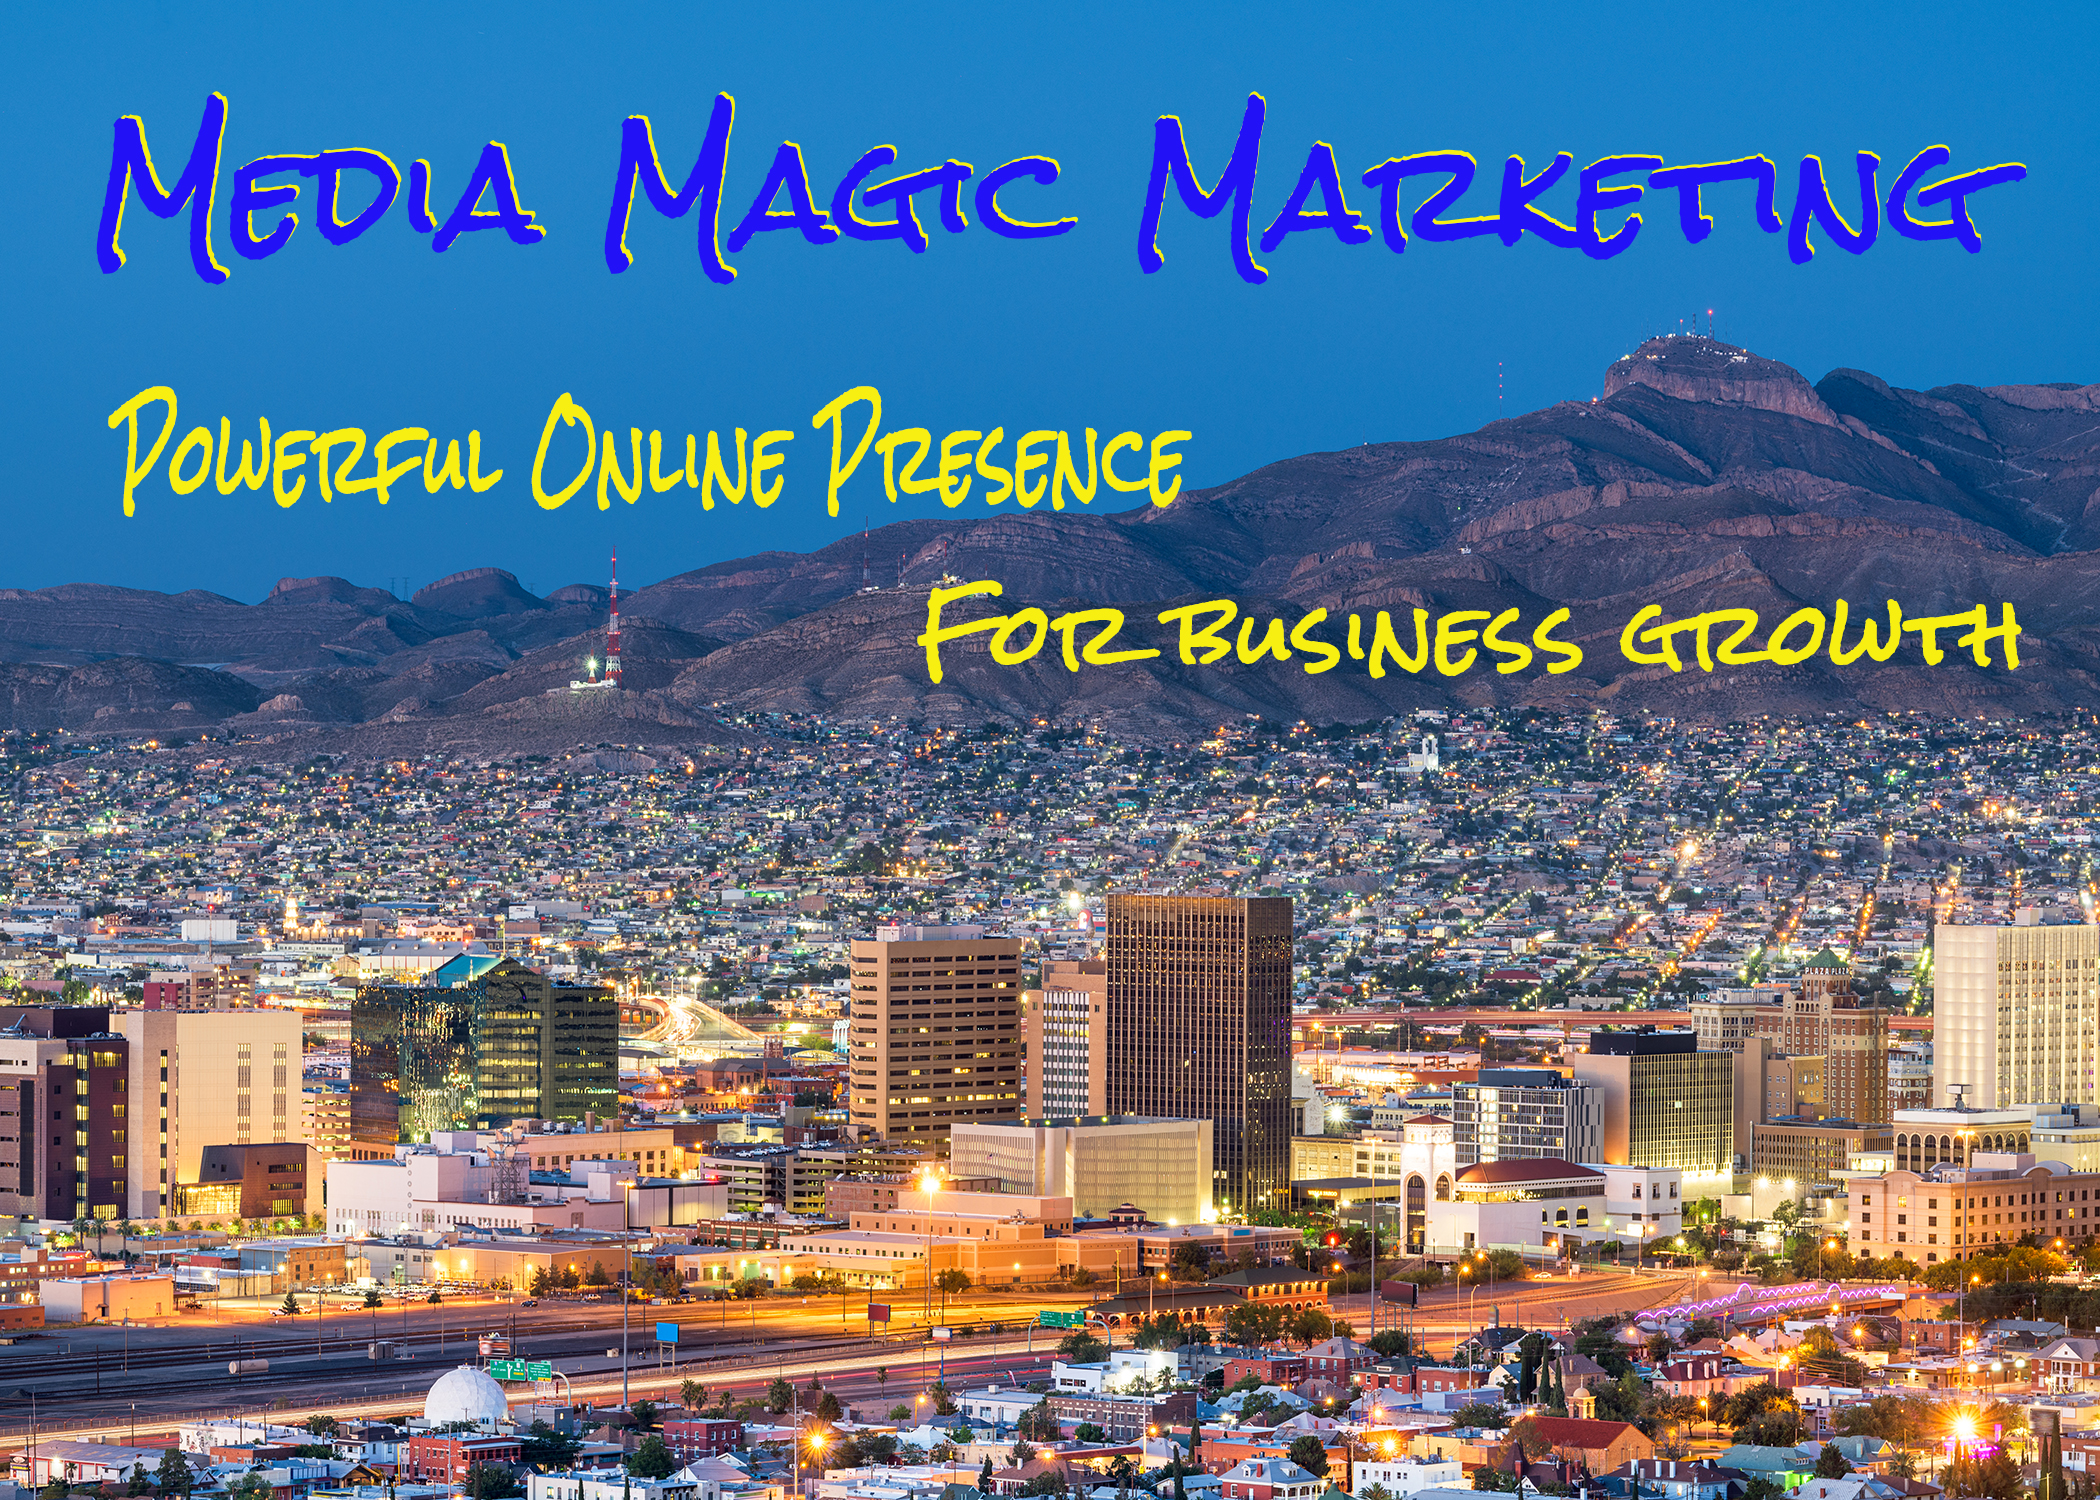 The Power of an Online Presence for Business Growth in El Paso